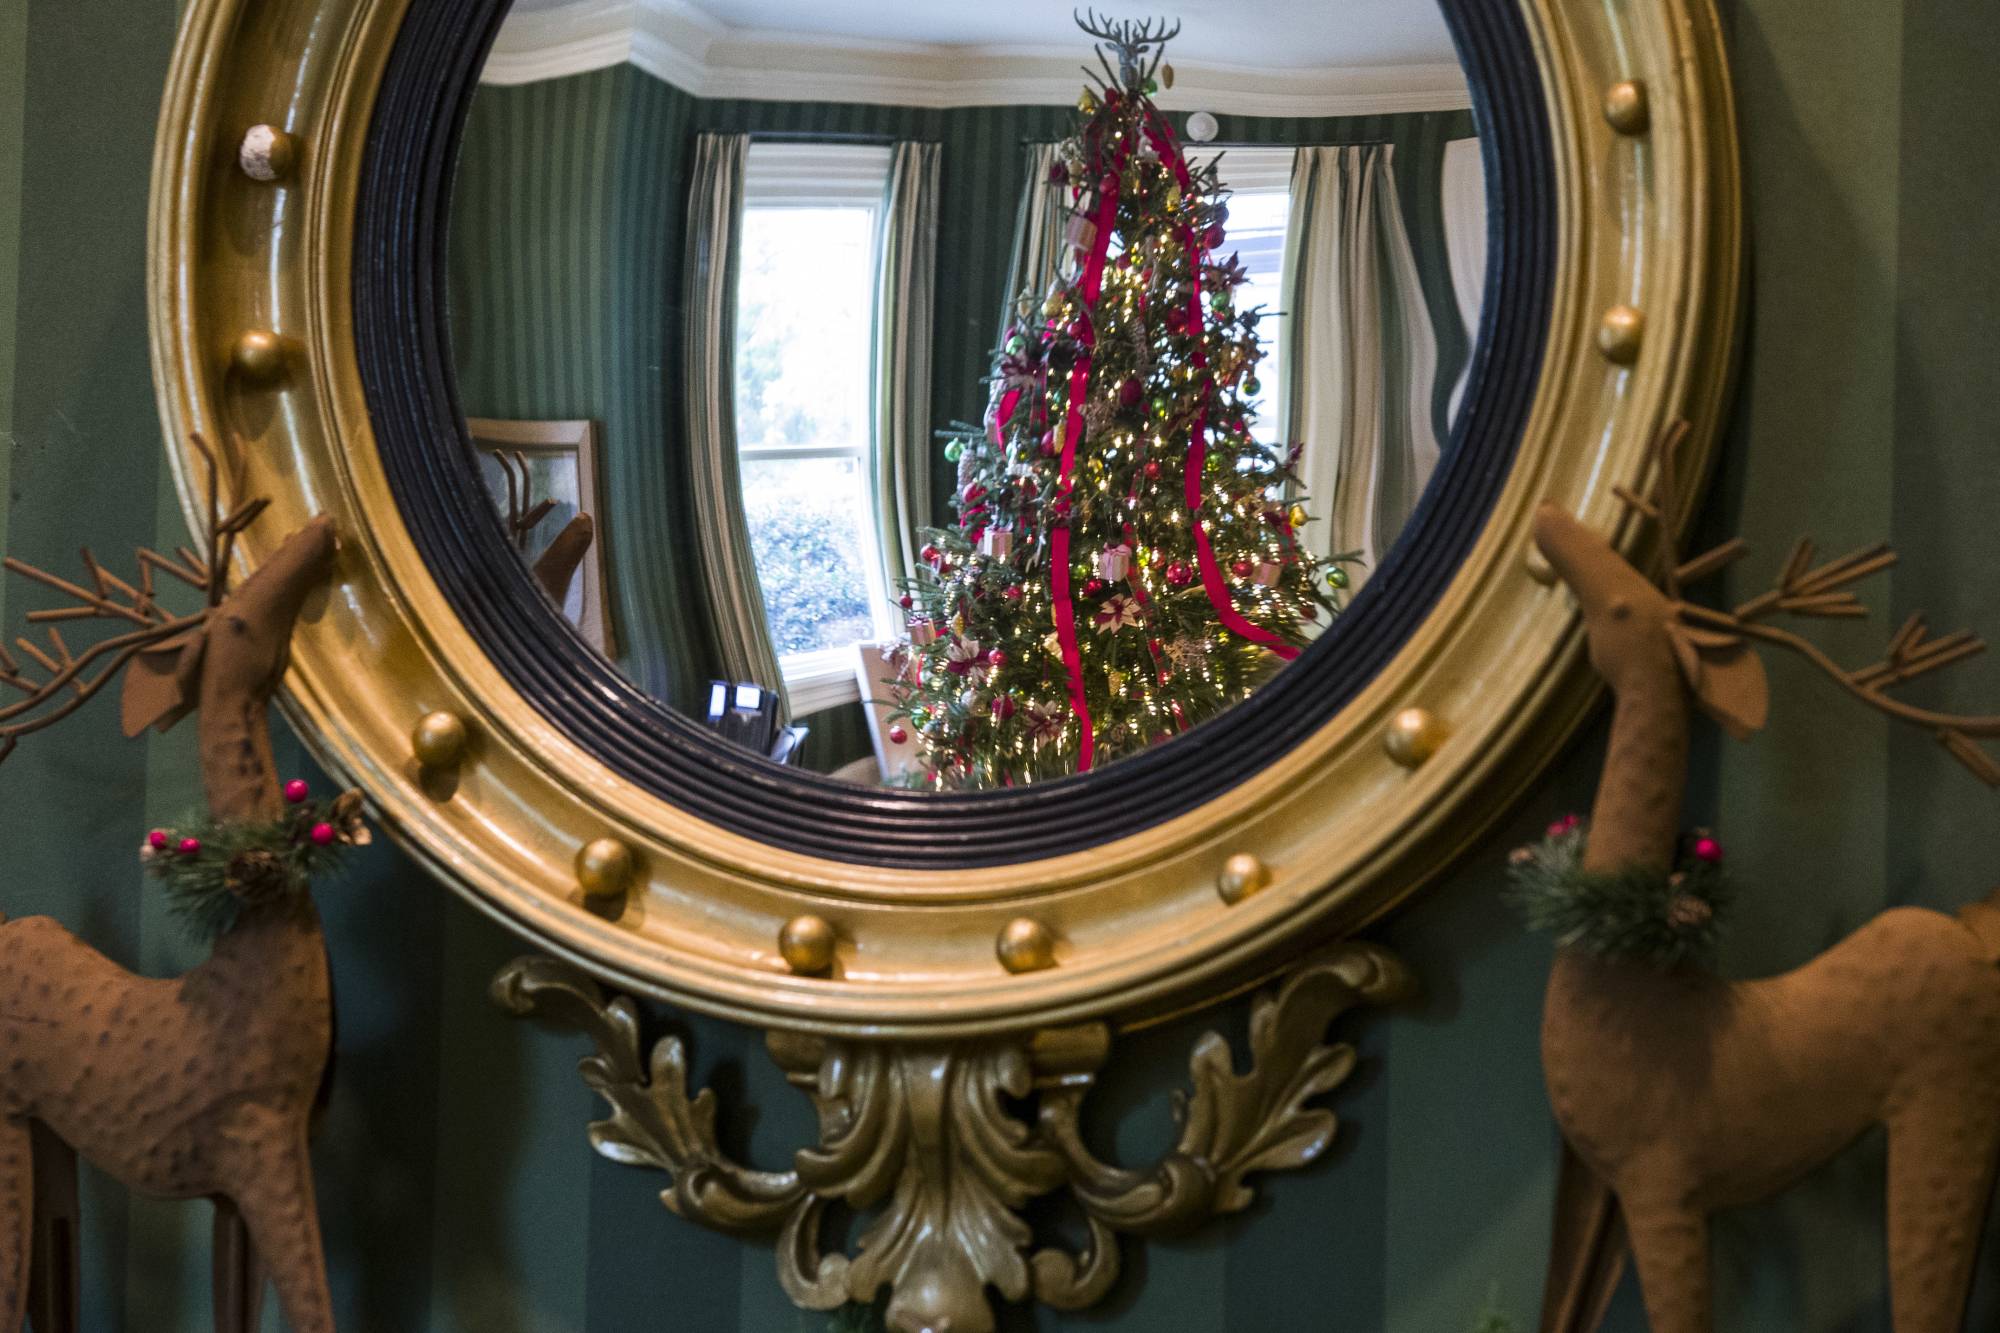 Holiday decorations are seen reflected in a mirror at the Vice President's residence, Thursday, Dec. 6, 2018, in Washington. (AP Photo/Alex Brandon)